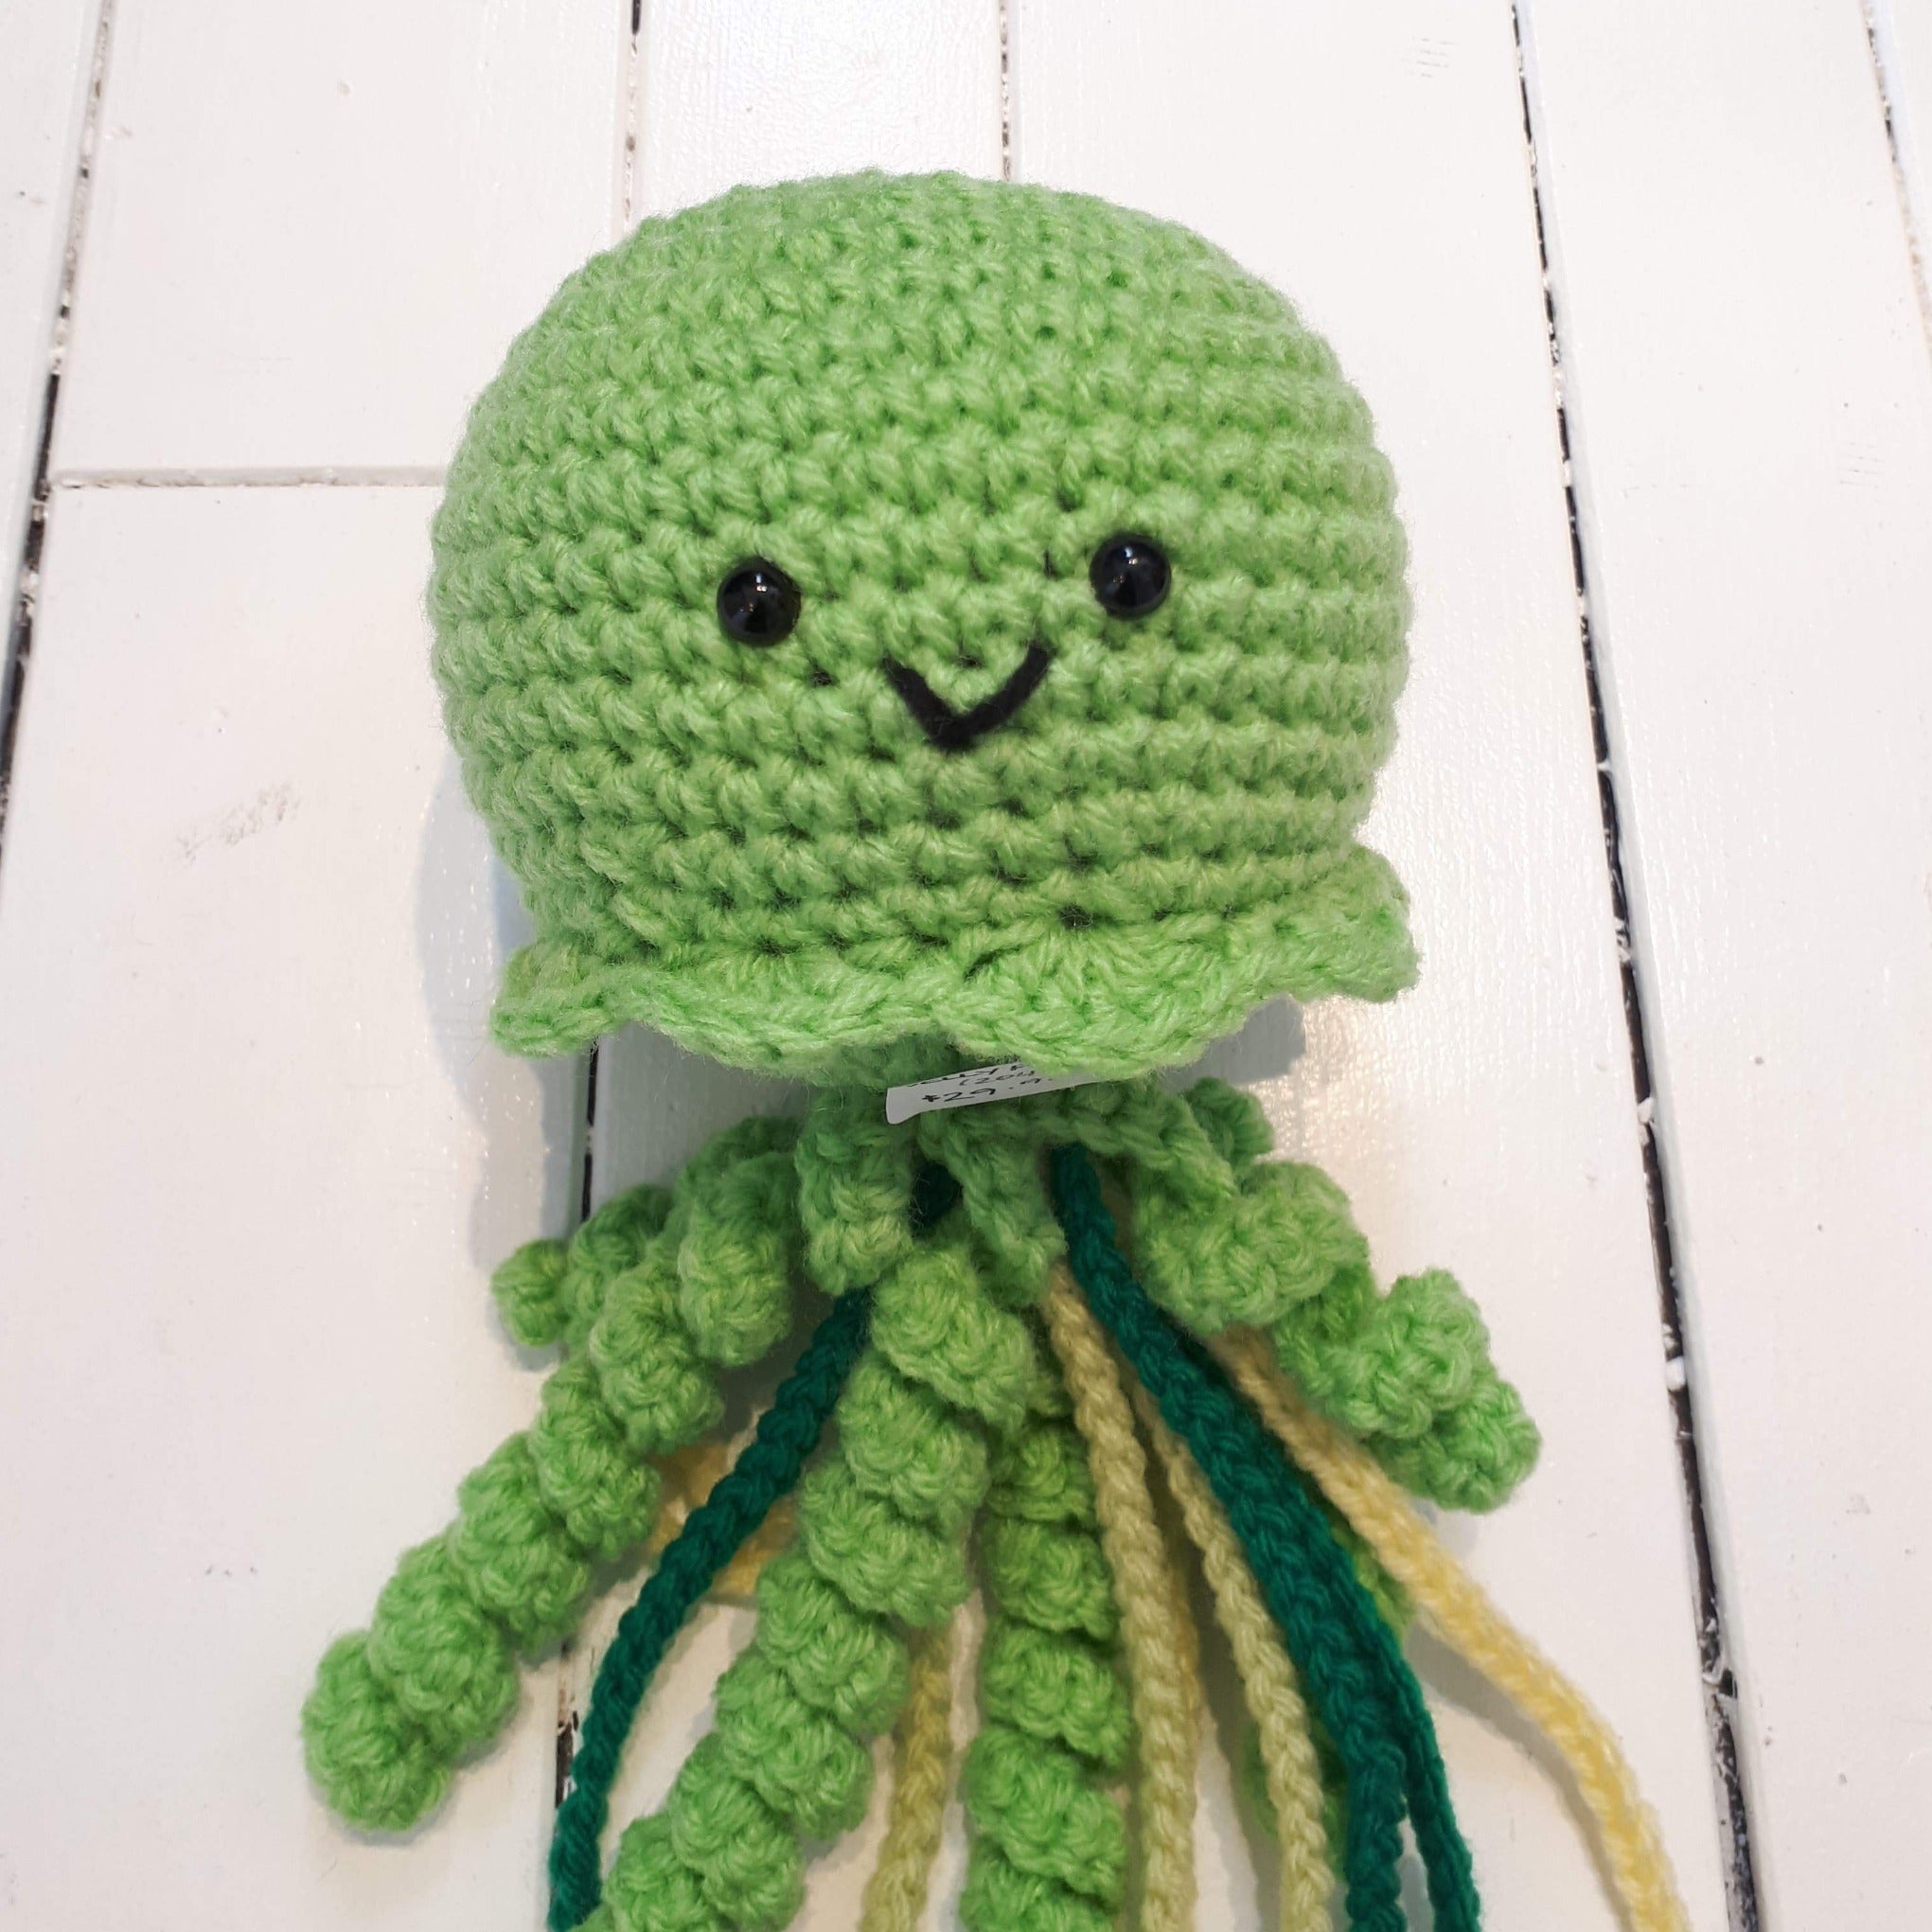 crochet plush toy jellyfish with smiley face and colourful tentacles made in Newfoundland